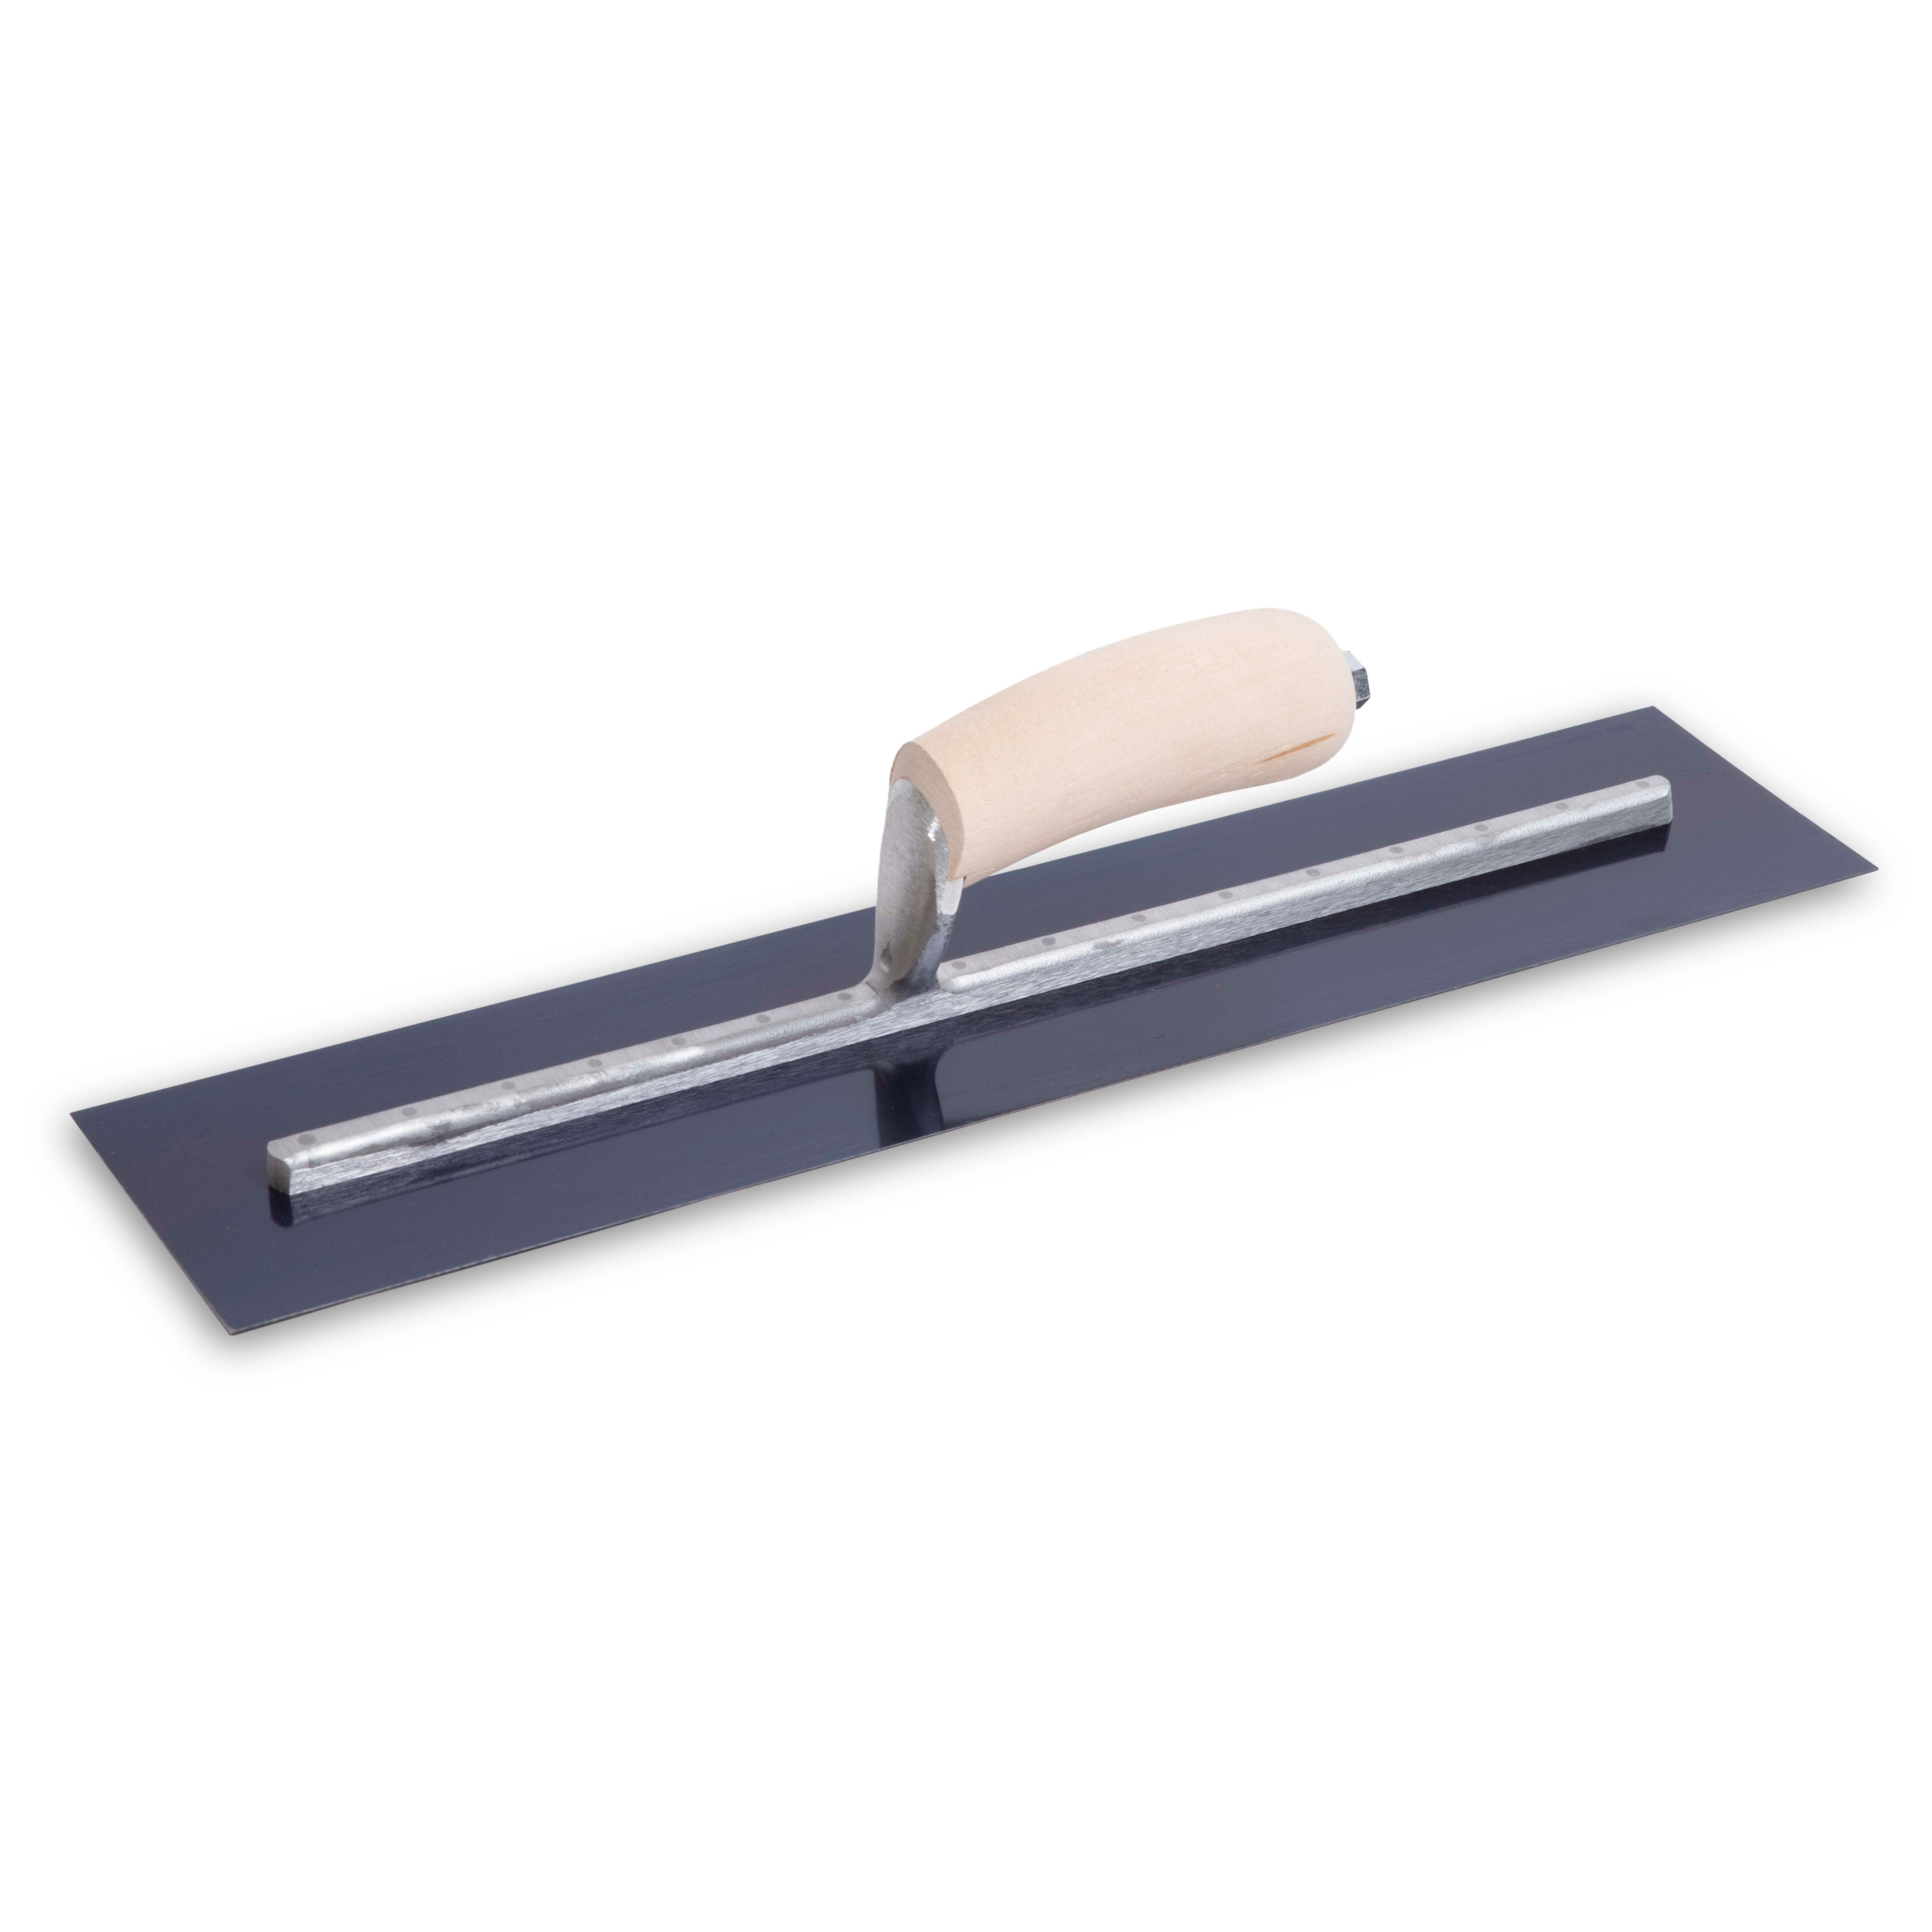 Marshalltown MXS81B 18in x 4in Blue Steel Finishing Trowel with Curved Wood Handle MXS81B